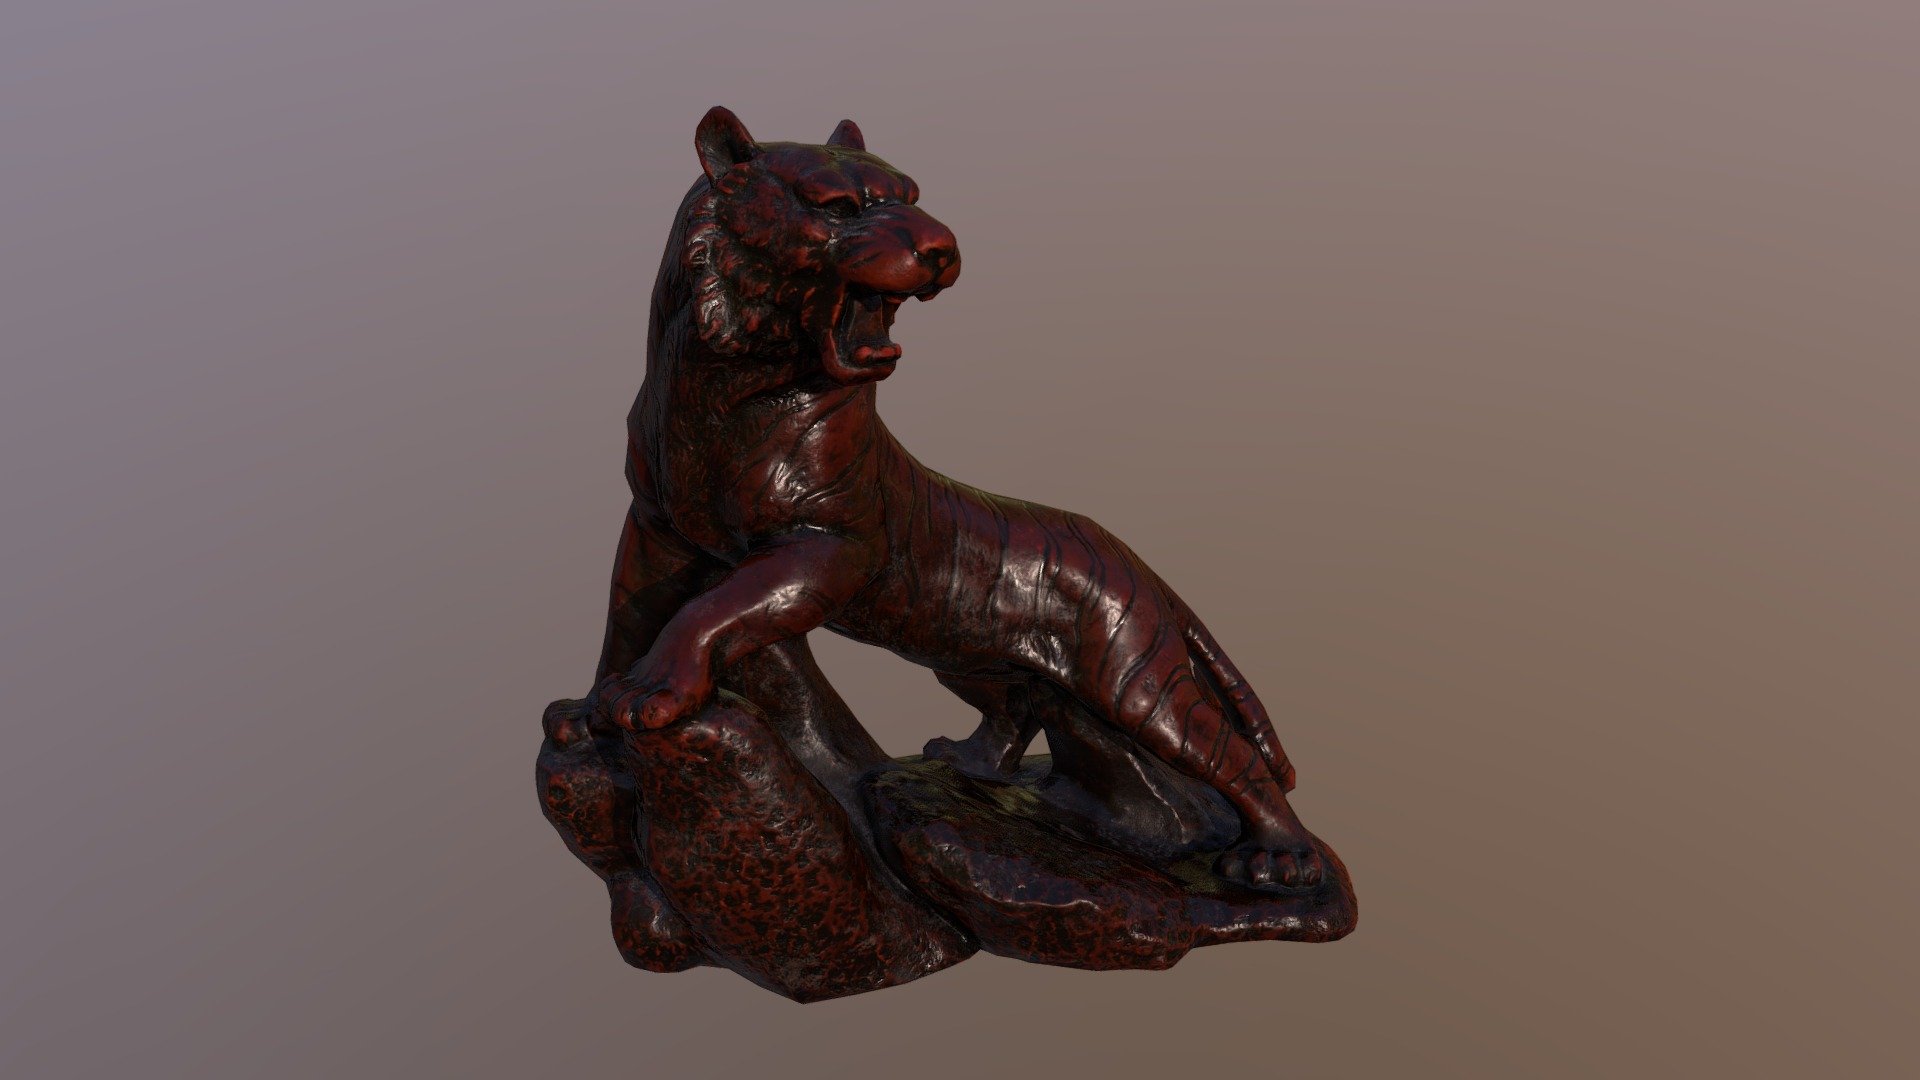 Photoscan of a Cinnabar Lacquer Resin tiger statue.

Processed with Reality Capture
- ~400 Photos taken
- Retopologized
- Baked Albedo, Normal, AO
- Detailing in Substance Painter - Tiger Statue - 3D model by shandolas 3d model